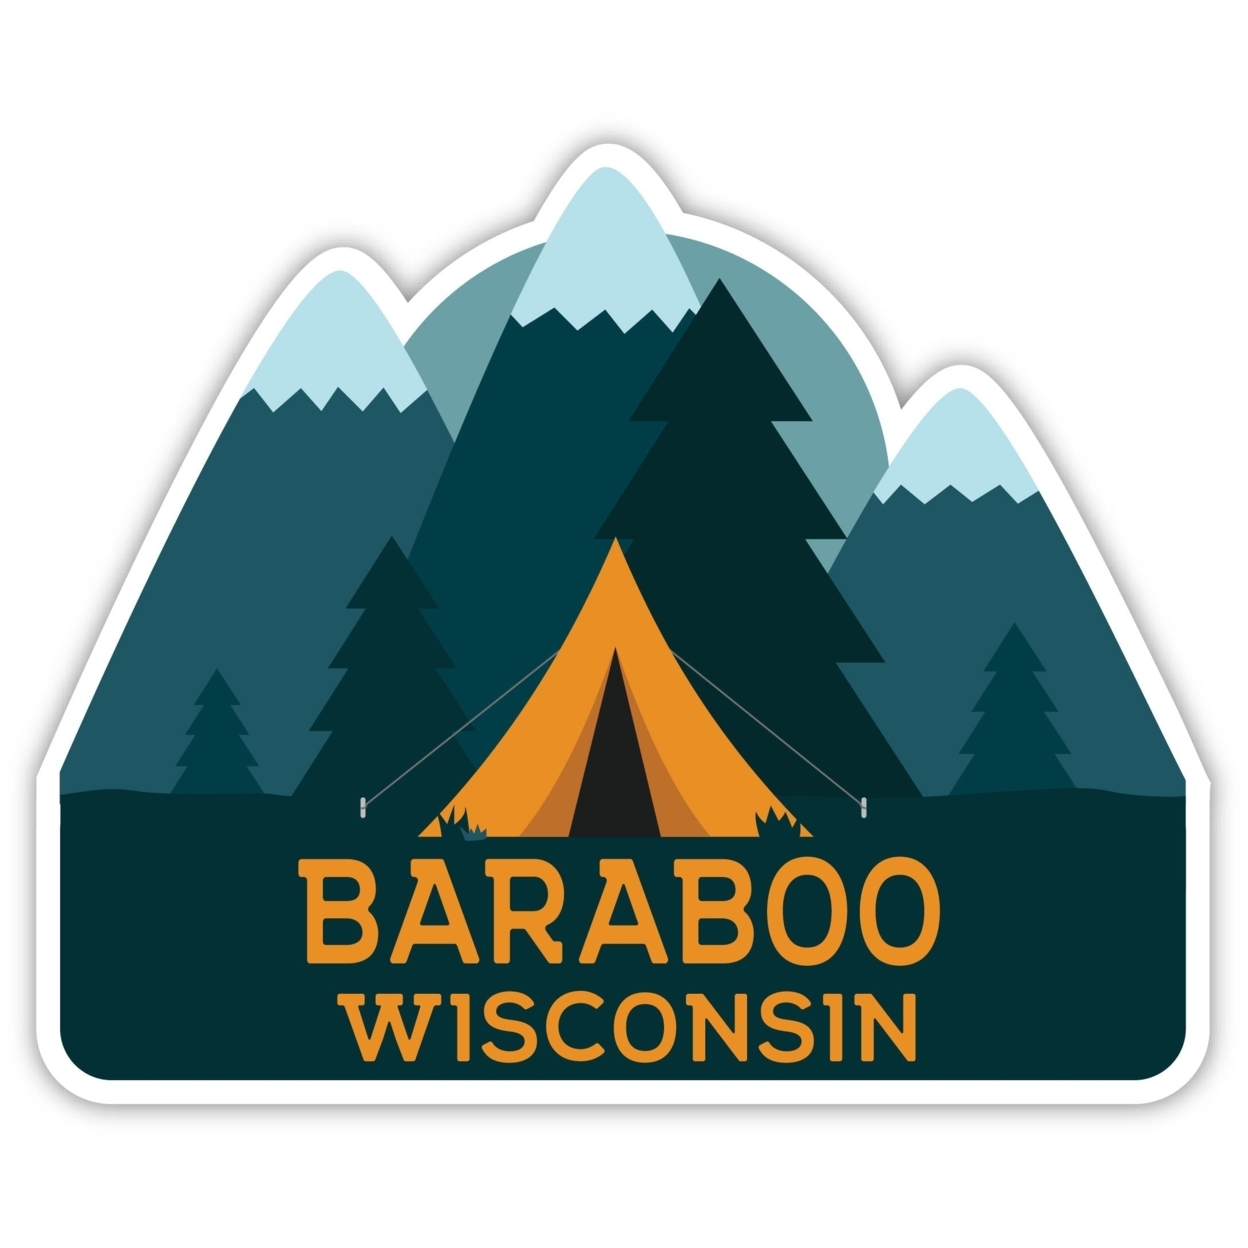 Baraboo Wisconsin Souvenir Decorative Stickers (Choose Theme And Size) - Single Unit, 6-Inch, Tent